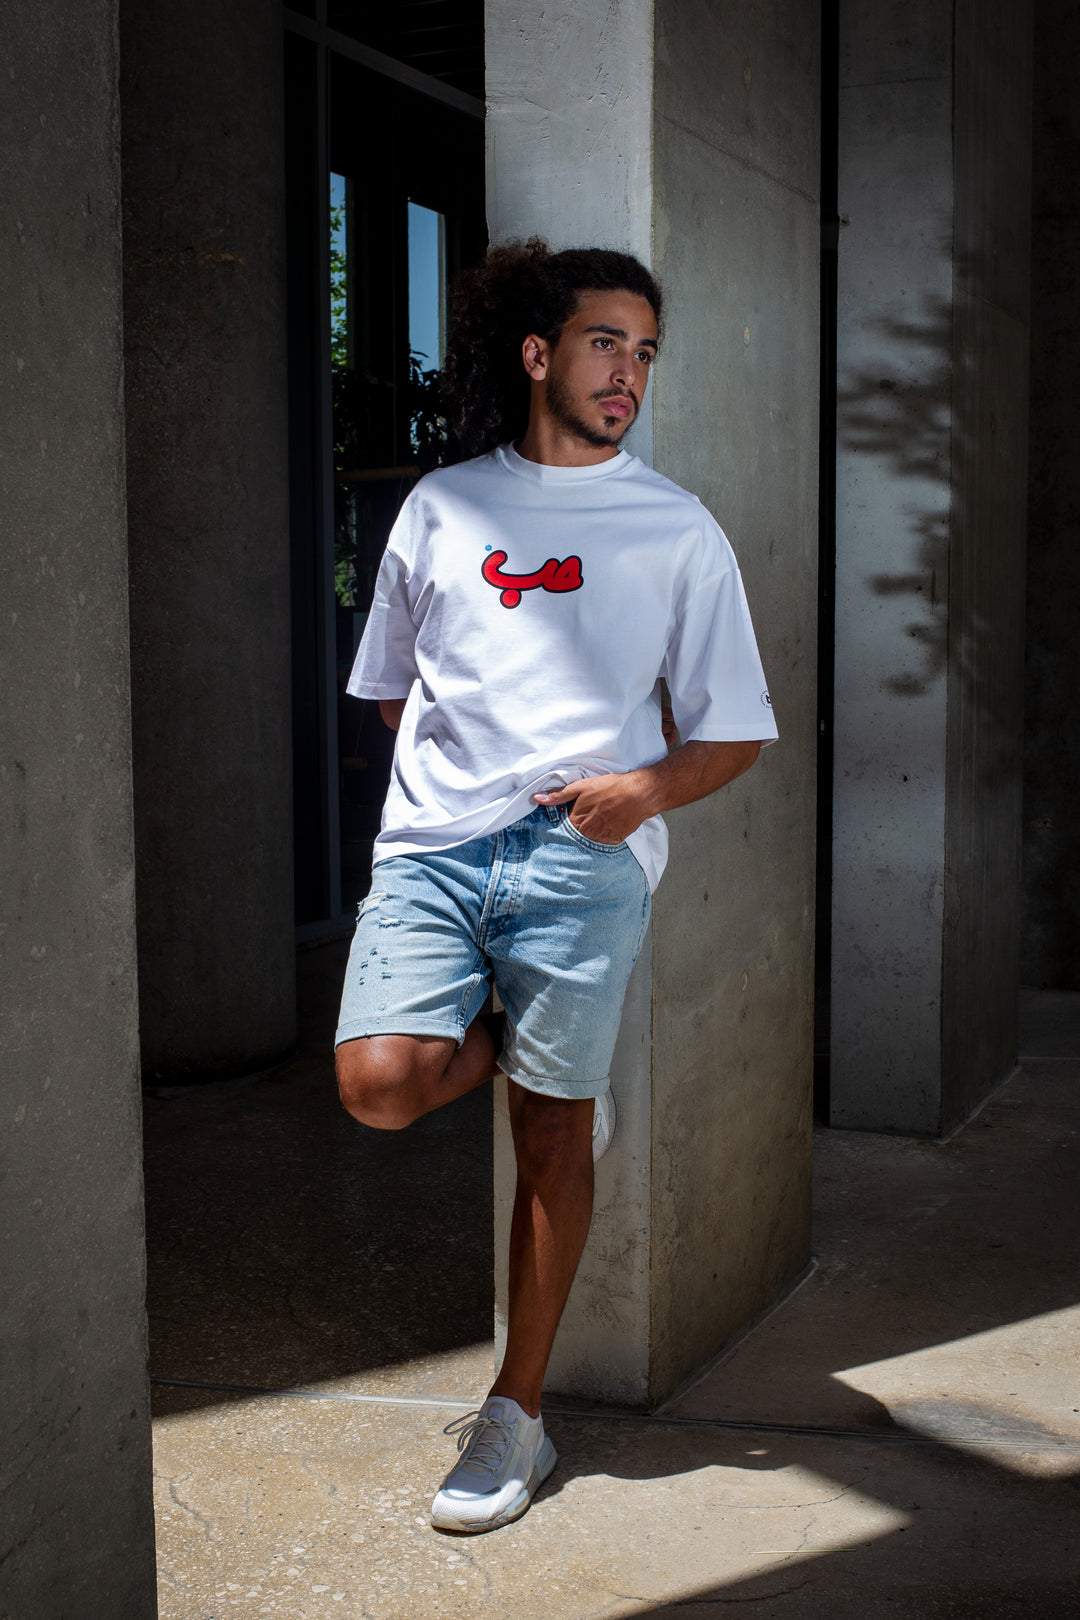 Young adult male wearing an Oversized white T-shirt with Verified Hobb written in Arabic حب and printed in red silkscreen in the center of the shirt along with jeans shorts and white sneakers.